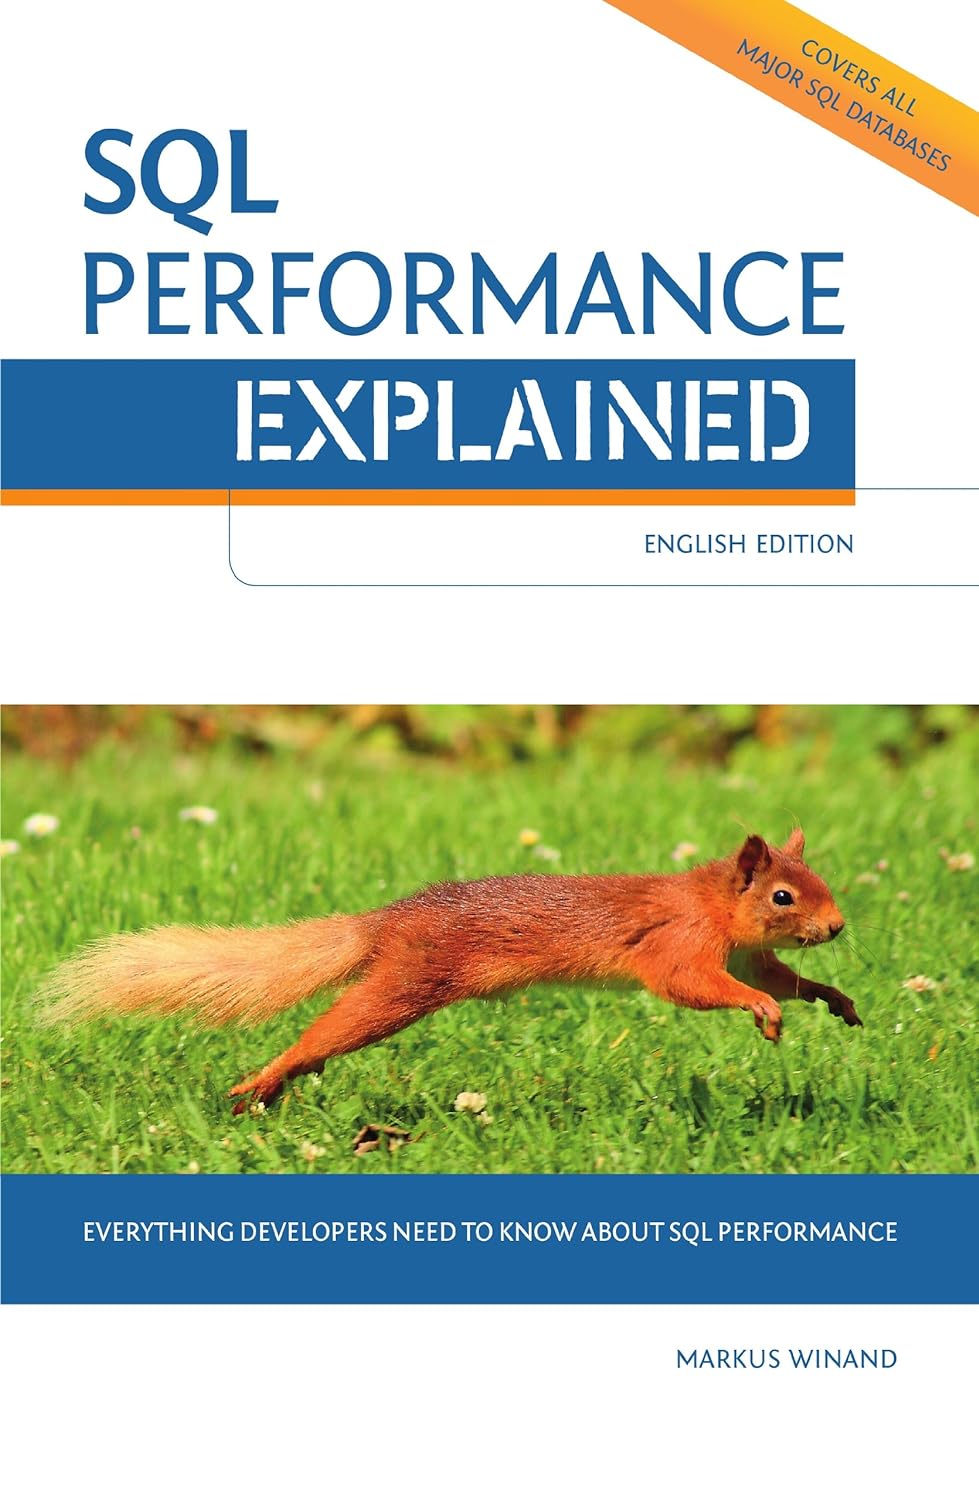 (EBook PDF)SQL Performance Explained Everything Developers Need to Know about SQL Performance by Markus Winand